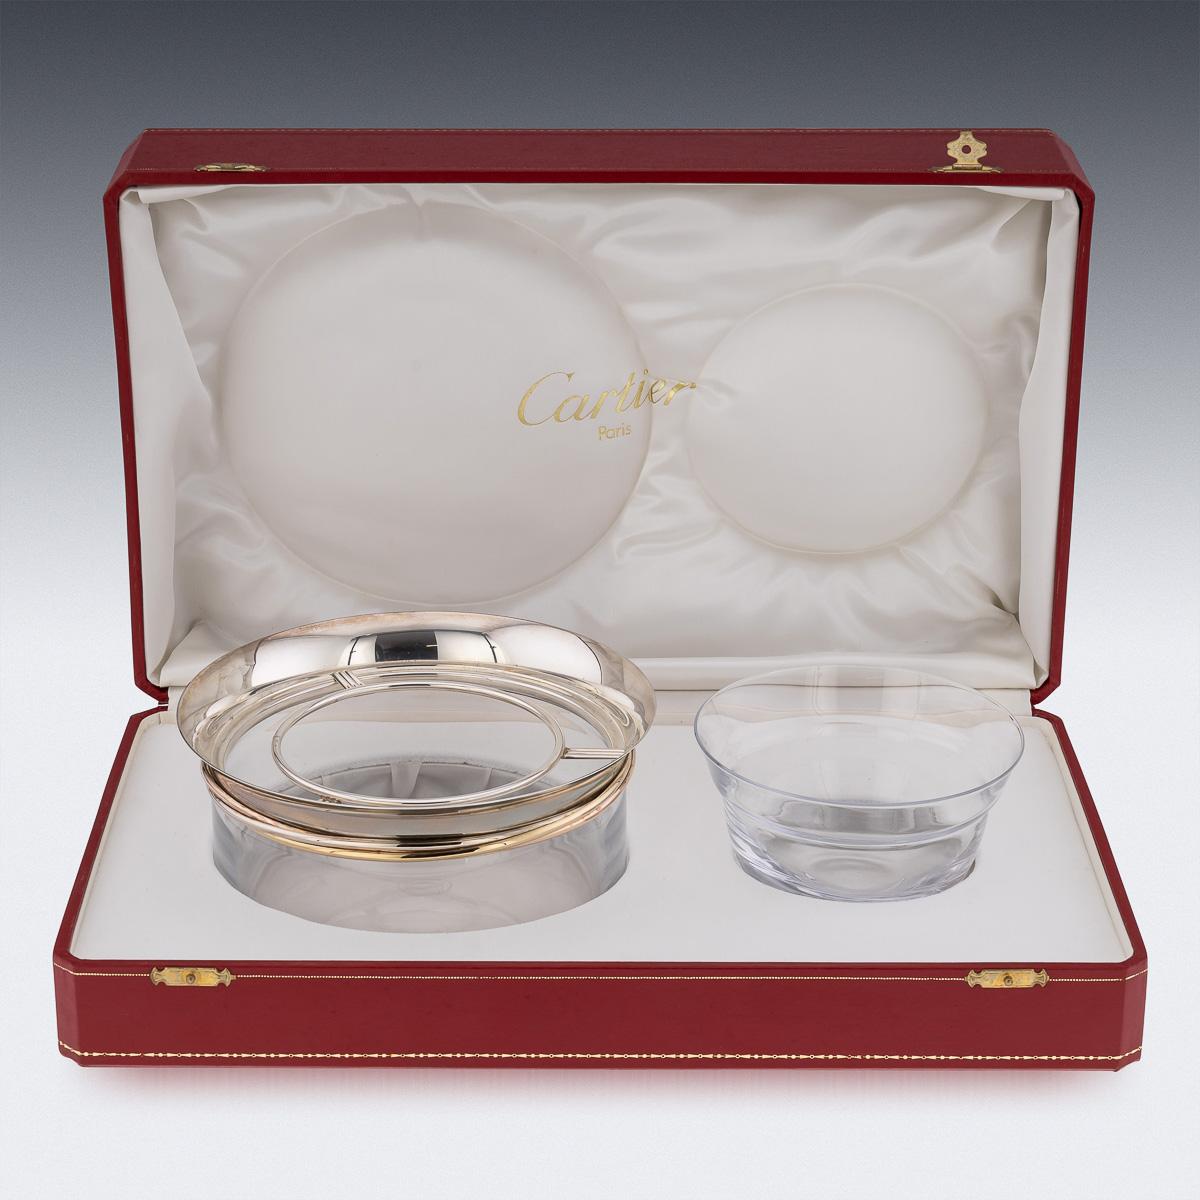 A spectacular Cartier glass caviar bowl and serving spoon, the bowls rim decorated with tri-color gold band and silver border, signed Cartier Paris, inventory numbered. Maker’s mark and assay mark for silver, made in France, and a serving caviar